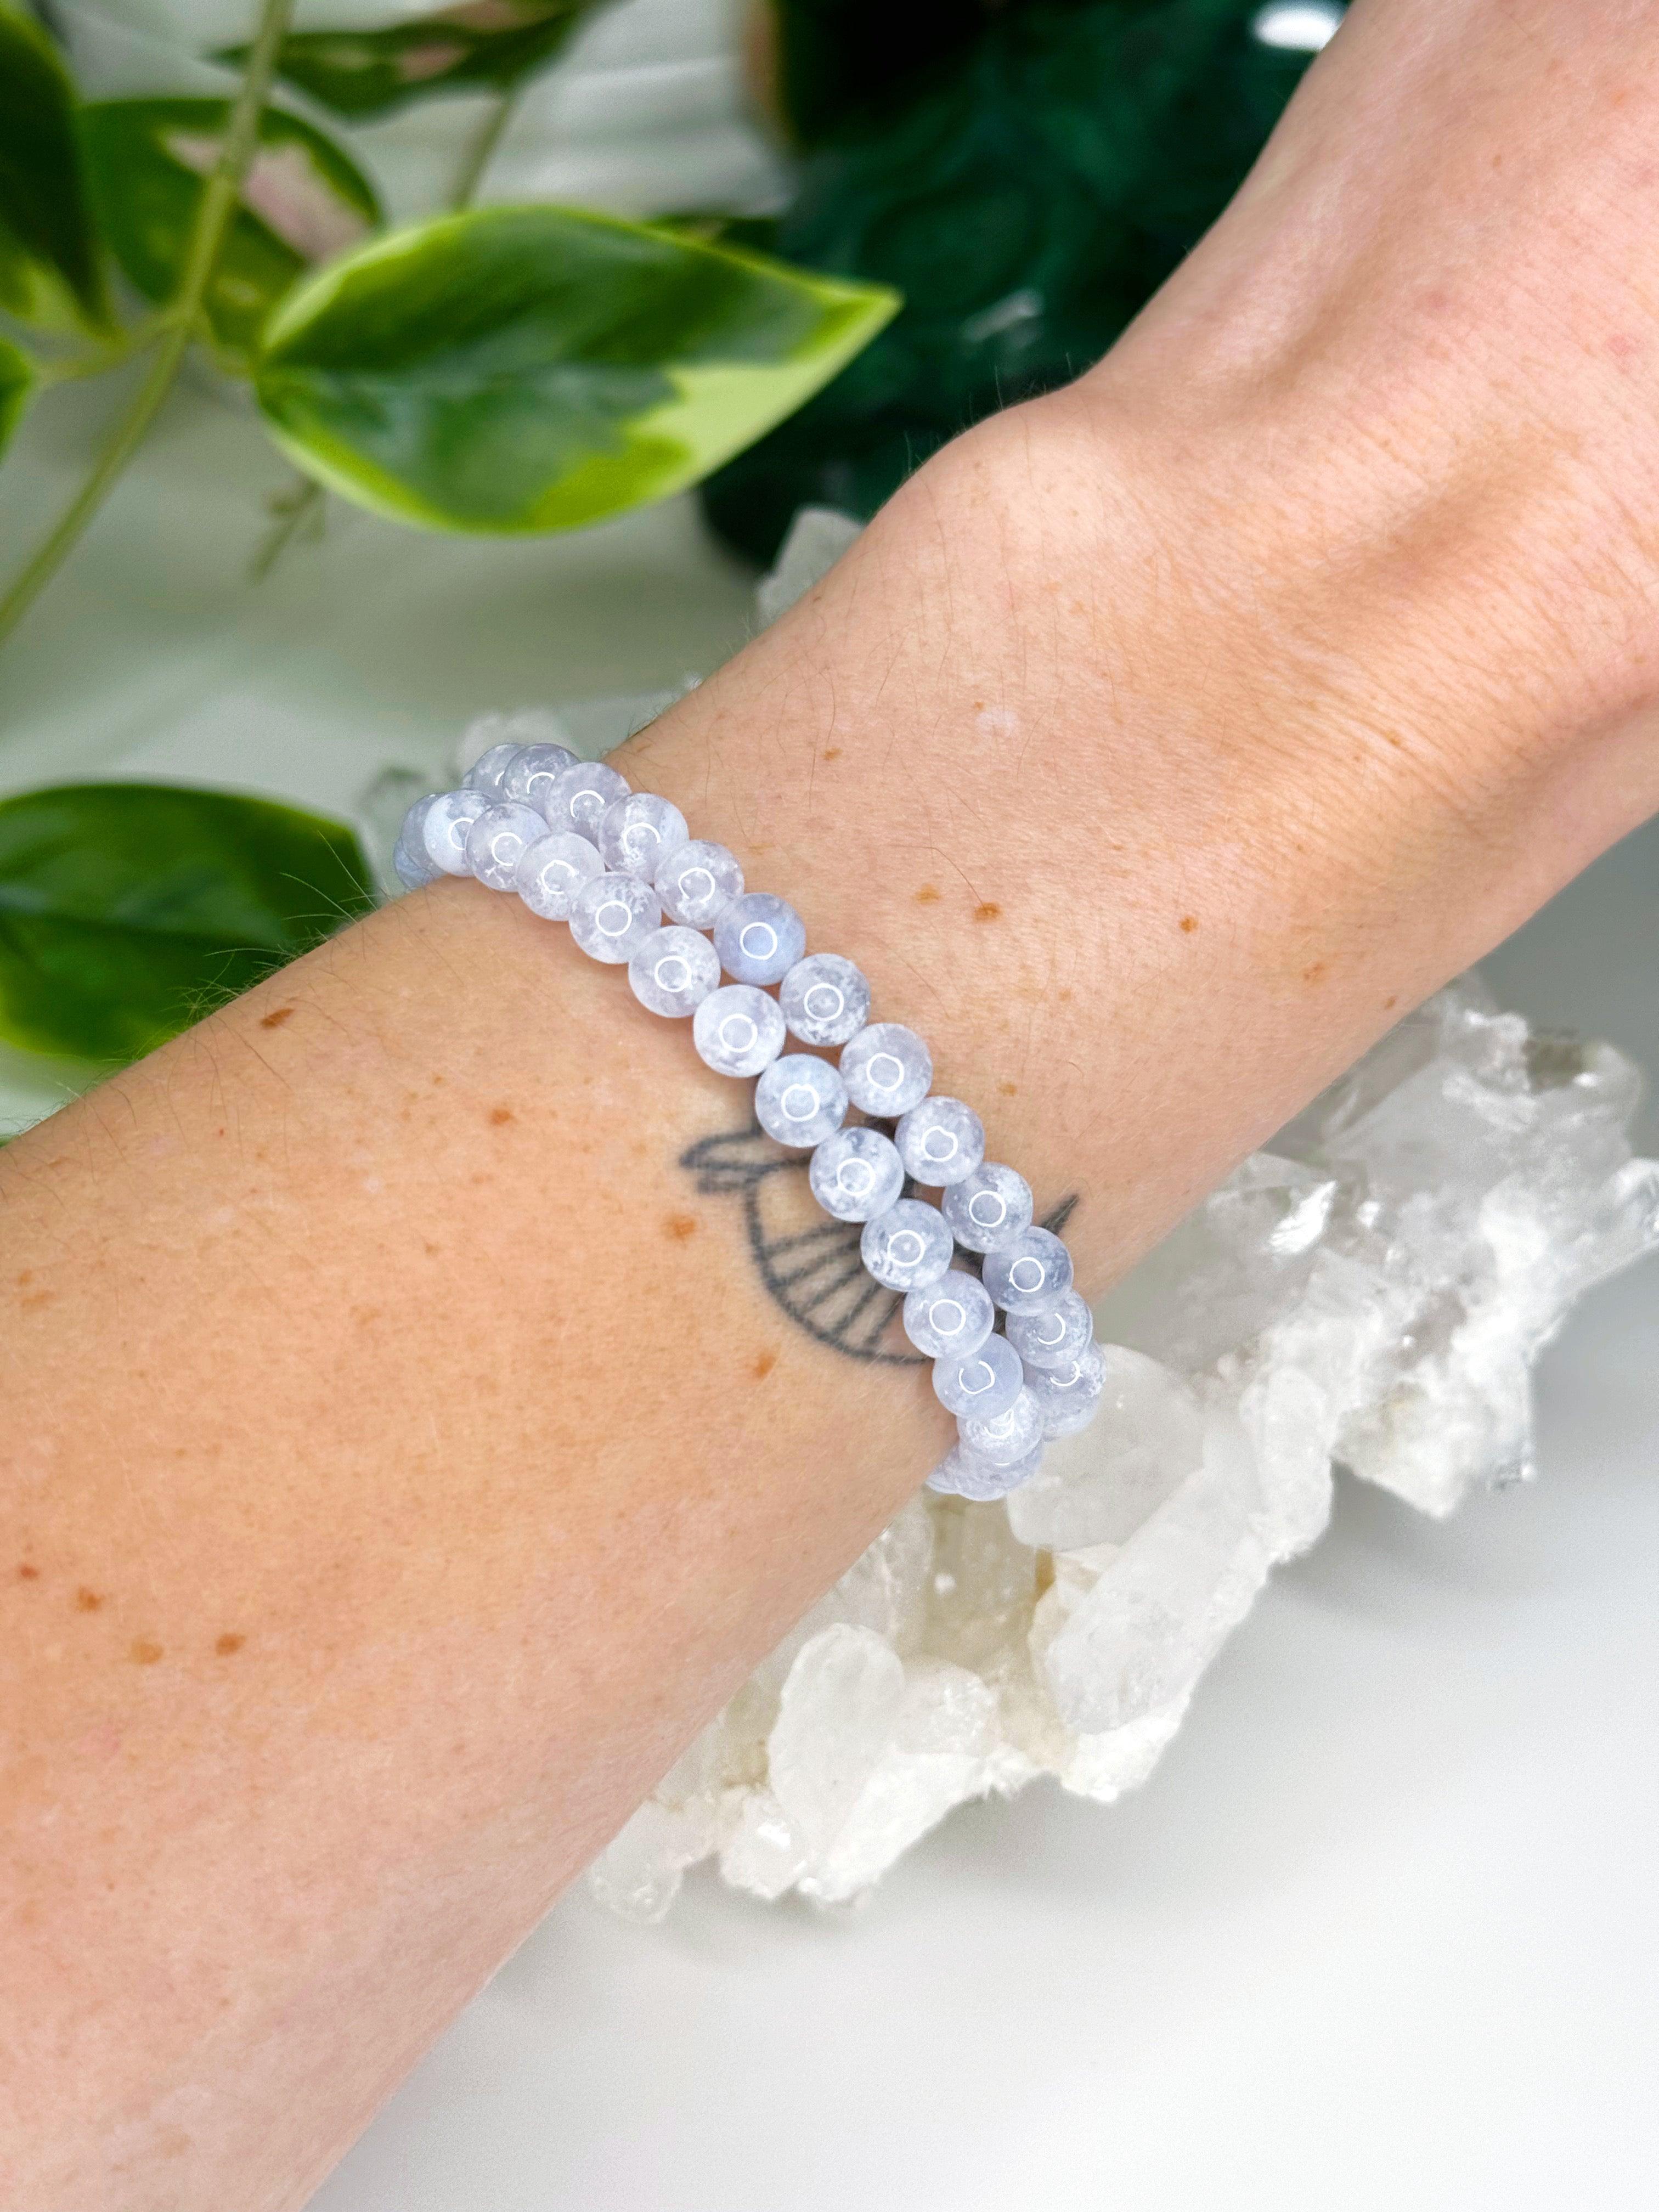 ICY BLUE LACE AGATE 6mm - HANDMADE CRYSTAL BRACELET - 6mm, air, blue, blue lace agate, bracelet, capricorn, capricorn stack, crystal bracelet, emotional support, gemini, gemini stack, handmade bracelet, icy, icy blue lace agate, jewelry, libra, libra stack, market bracelet, mercury retrograde, mercury retrograde stack, pisces, pisces stack, recently added, sagittarius, sagittarius stack, single bracelets, virgo, virgo stack, Wearable, winter collection, winter solstice collection - The Mineral Maven